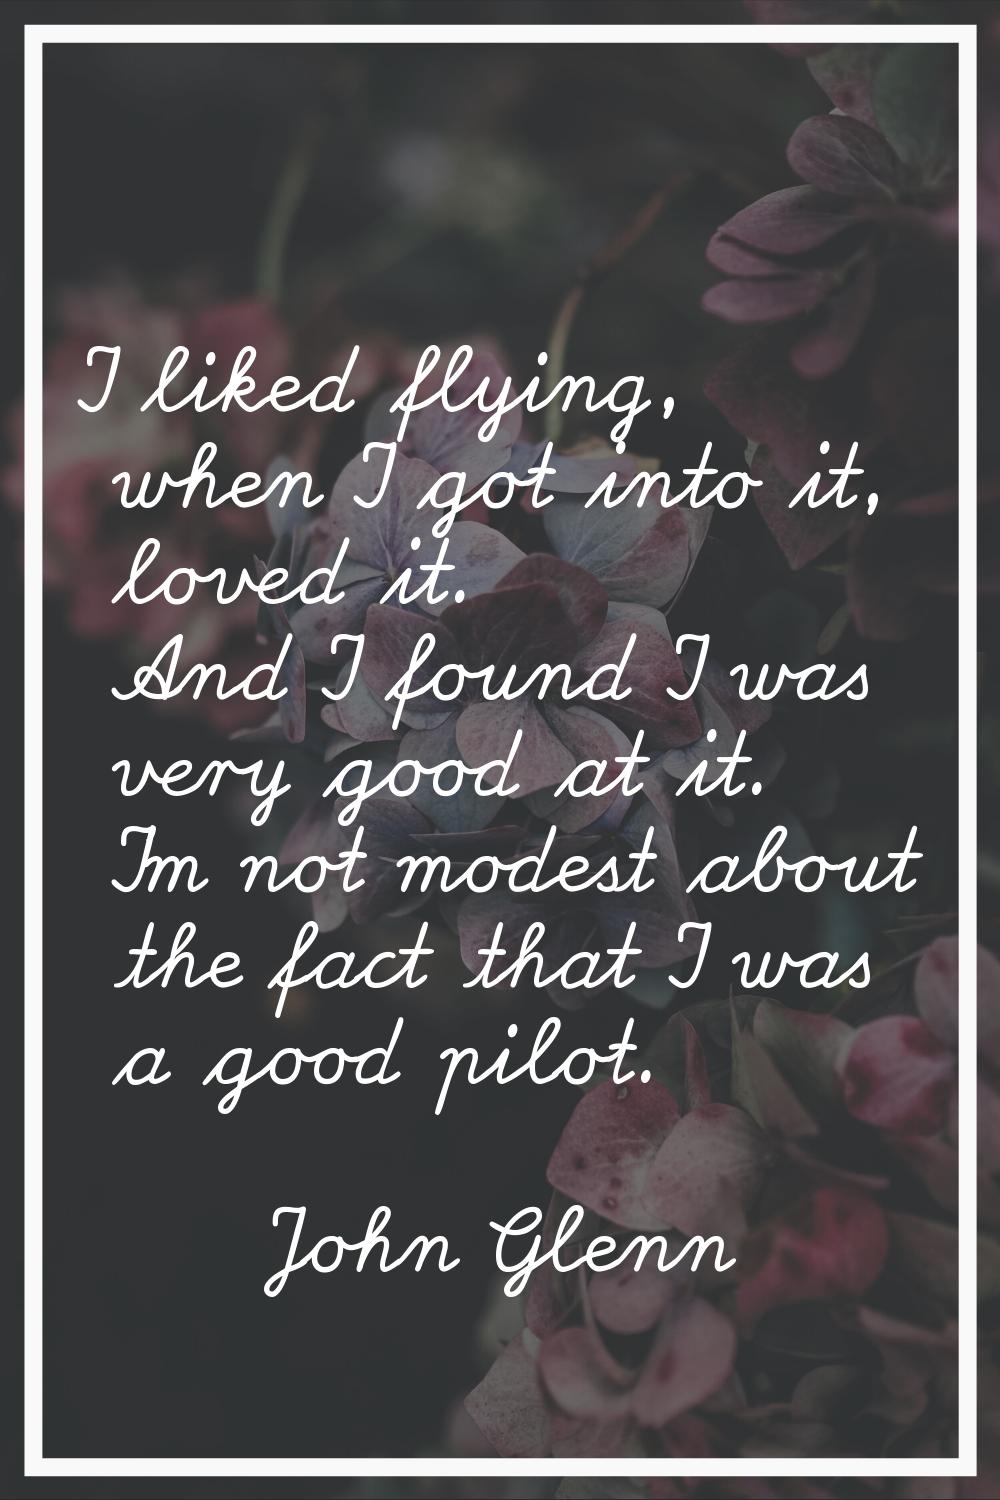 I liked flying, when I got into it, loved it. And I found I was very good at it. I'm not modest abo